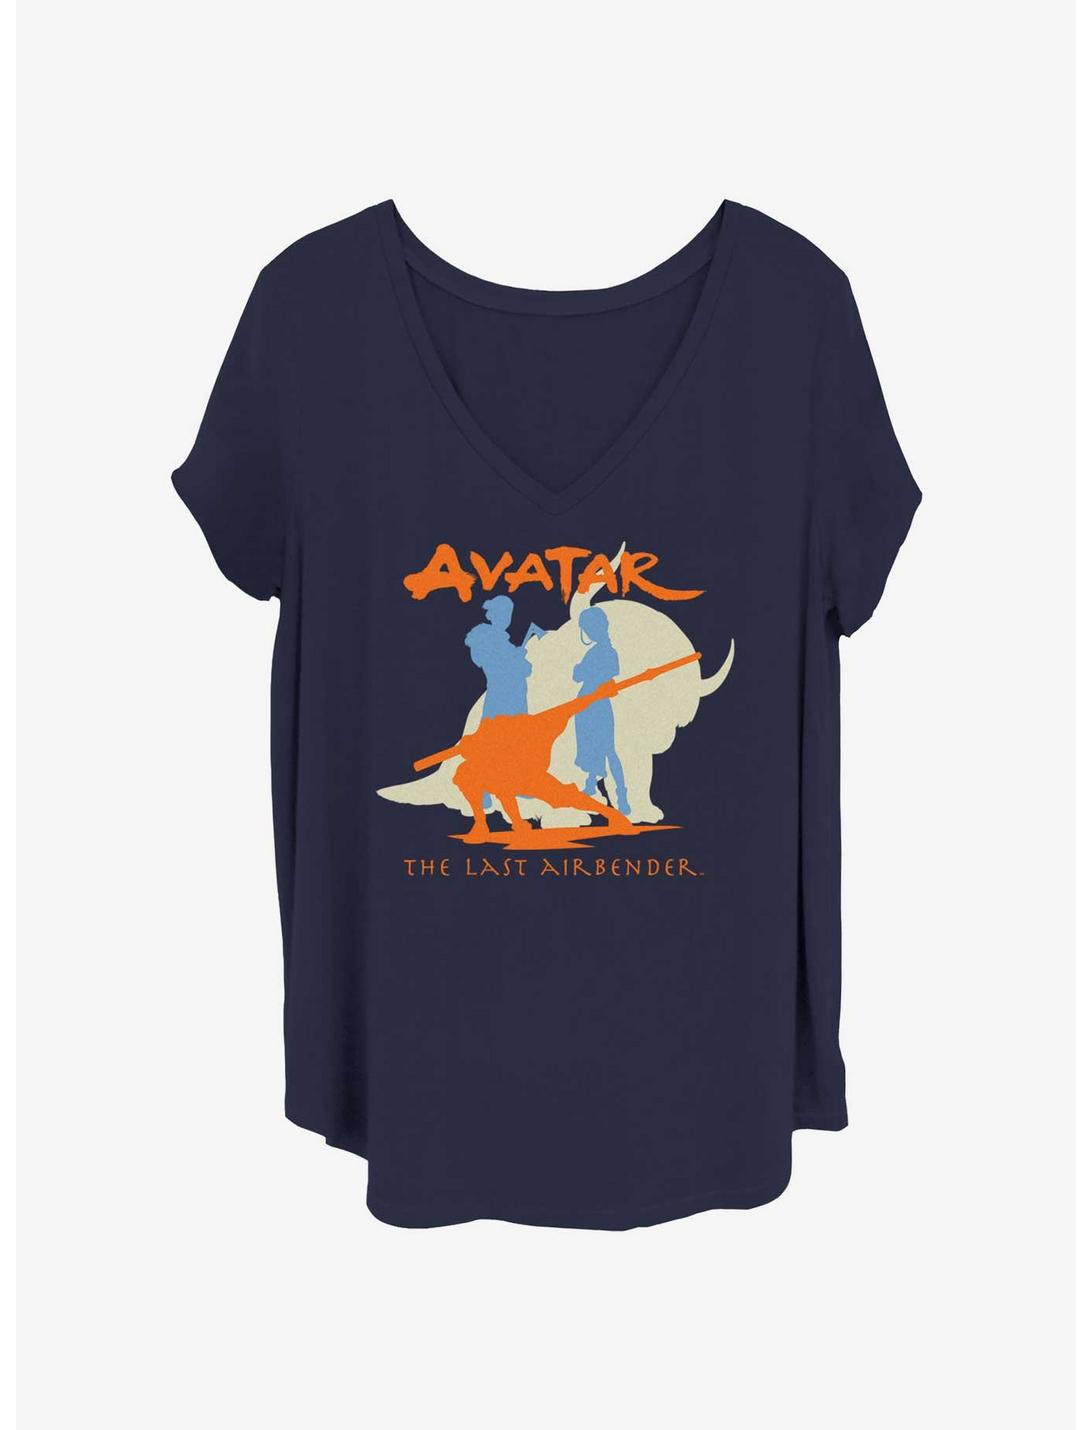 Avatar: The Last Airbender Silhouette Womens T-Shirt Plus Size, NAVY, hi-res